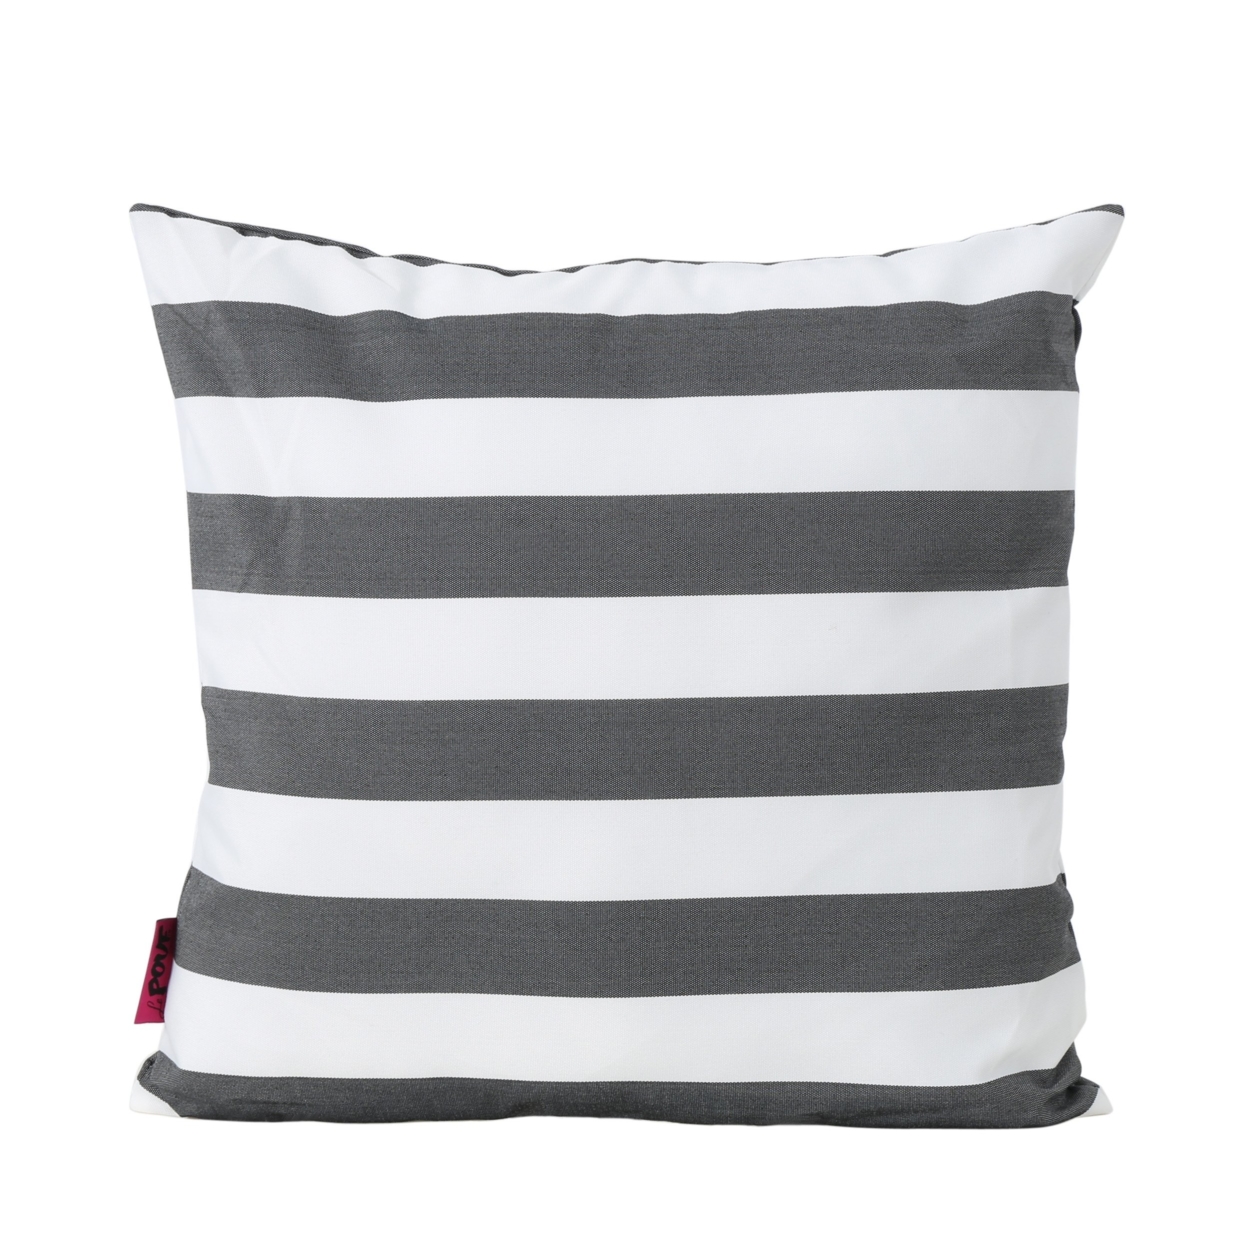 La Mesa Indoor Striped Water Resistant Square Throw Pillow - Green/white, Set Of 2